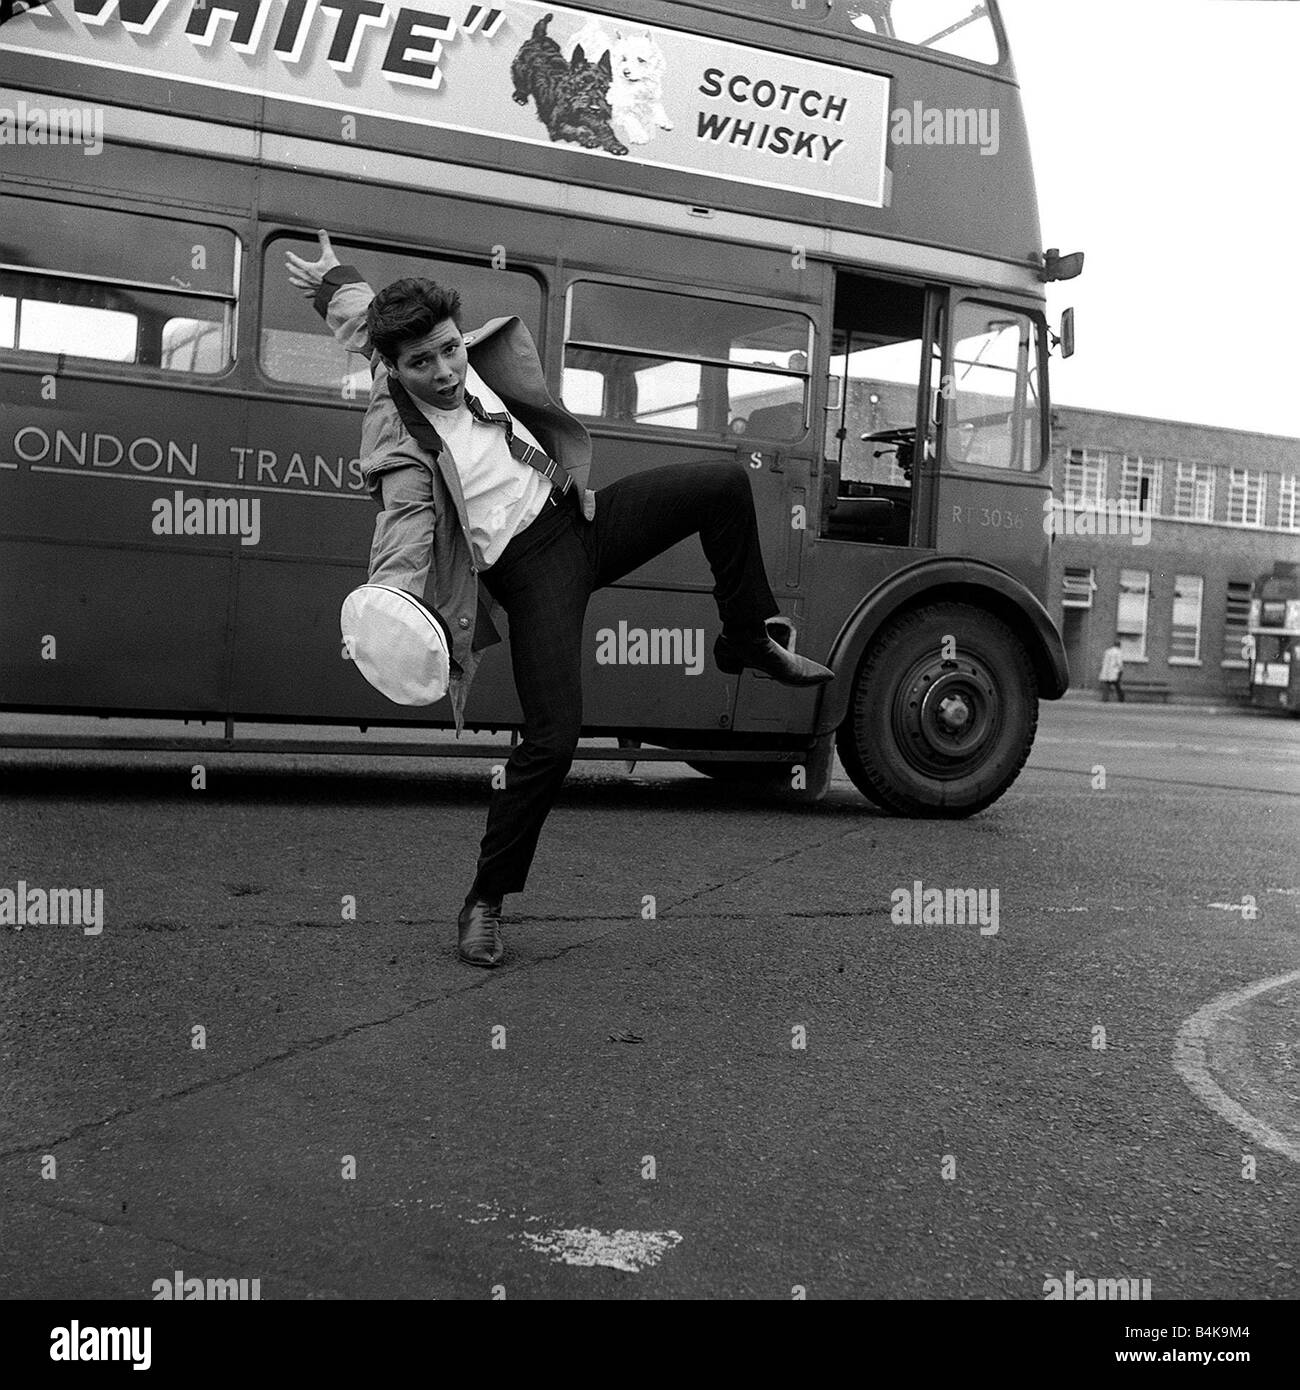 Cliff Richard prepares for his ne role in Summer Holiday by taking control of a 7 5 ton red bus at Chiswich London Transport driving school 07 05 62 Q3930 y2k The plot A double decker tour bus on a trip to Athens collides with a car carrying three female musicians Later the bus picks up a winsome young boy Lauri Peters who turns out to be an incognito American songstress Barbara who is trying to hide out from her overbearing mother and overzealous agent The bus doesn t go too far before she and the bus mechanic Don Cliff Richard fall in love Many musical interludes spice up this romantic tale Stock Photo